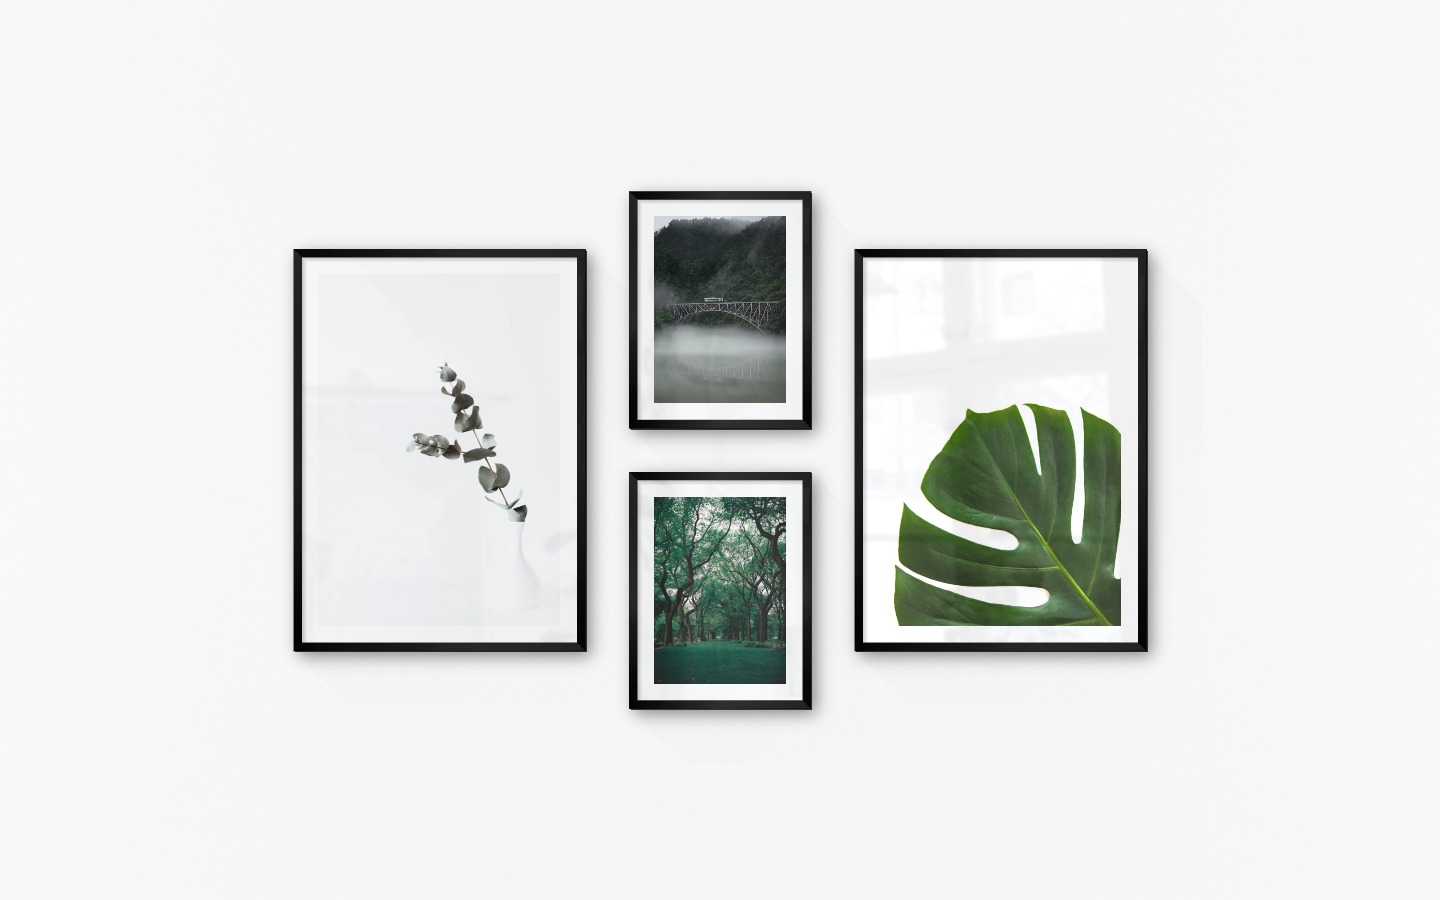 Gallery wall with picture frames in black in sizes 50x70 and 30x40 with prints "Branch in vase", "Train over bridge", "Greenery and trees" and "Plant"